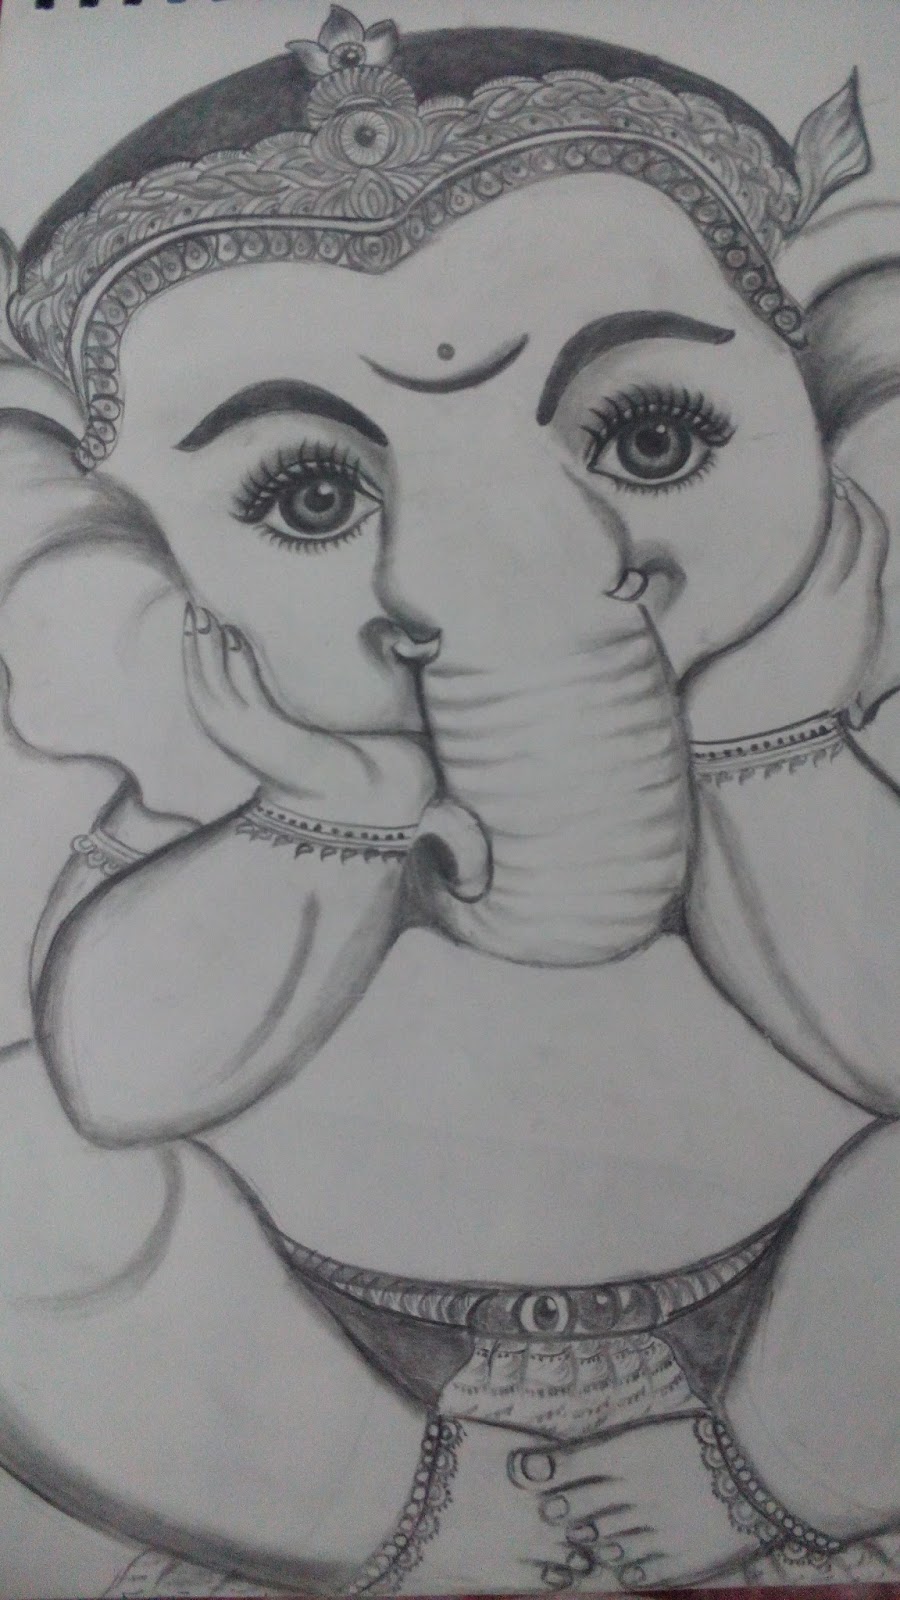 Original Paintings and Sketchs by Artist Chetna Sketch of Lord Ganesha